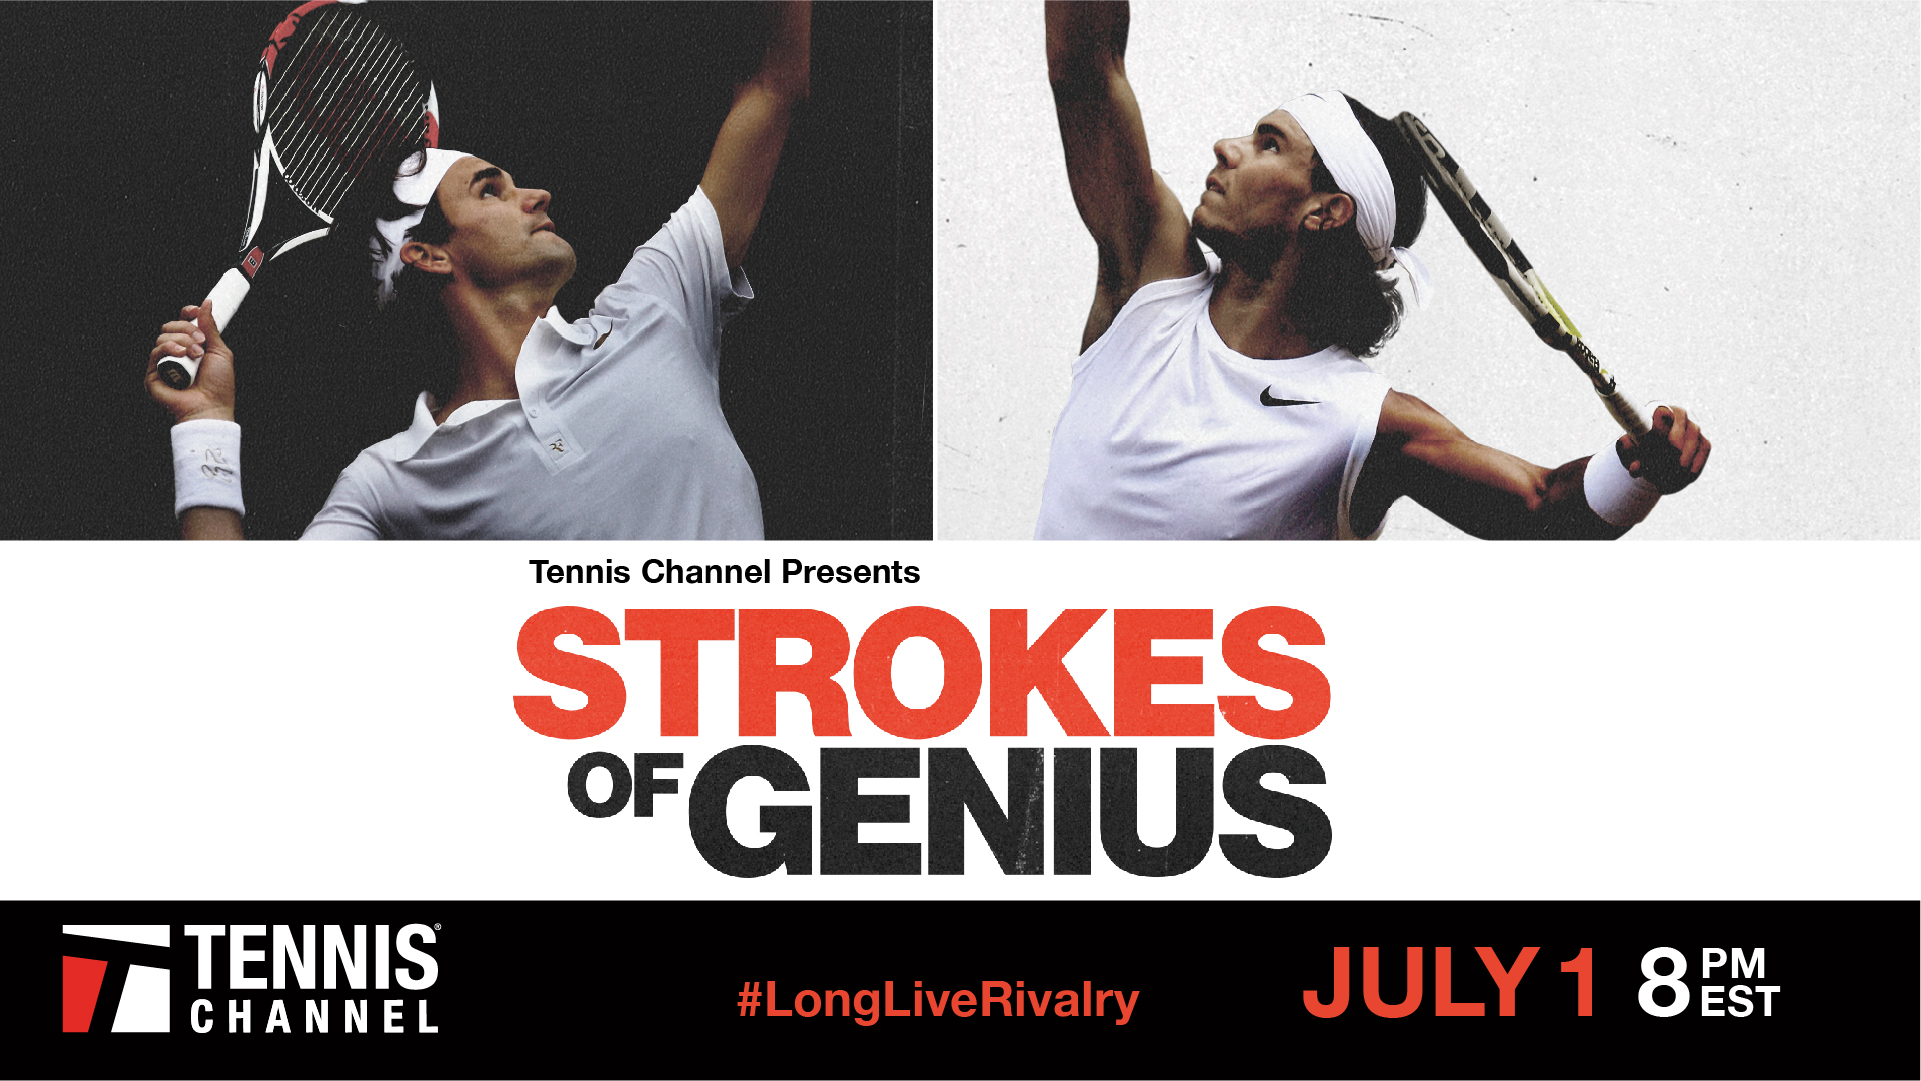 Strokes of Genius Tennis Channel Documentary Honors 2008 Federer-Nadal Wimbledon Final